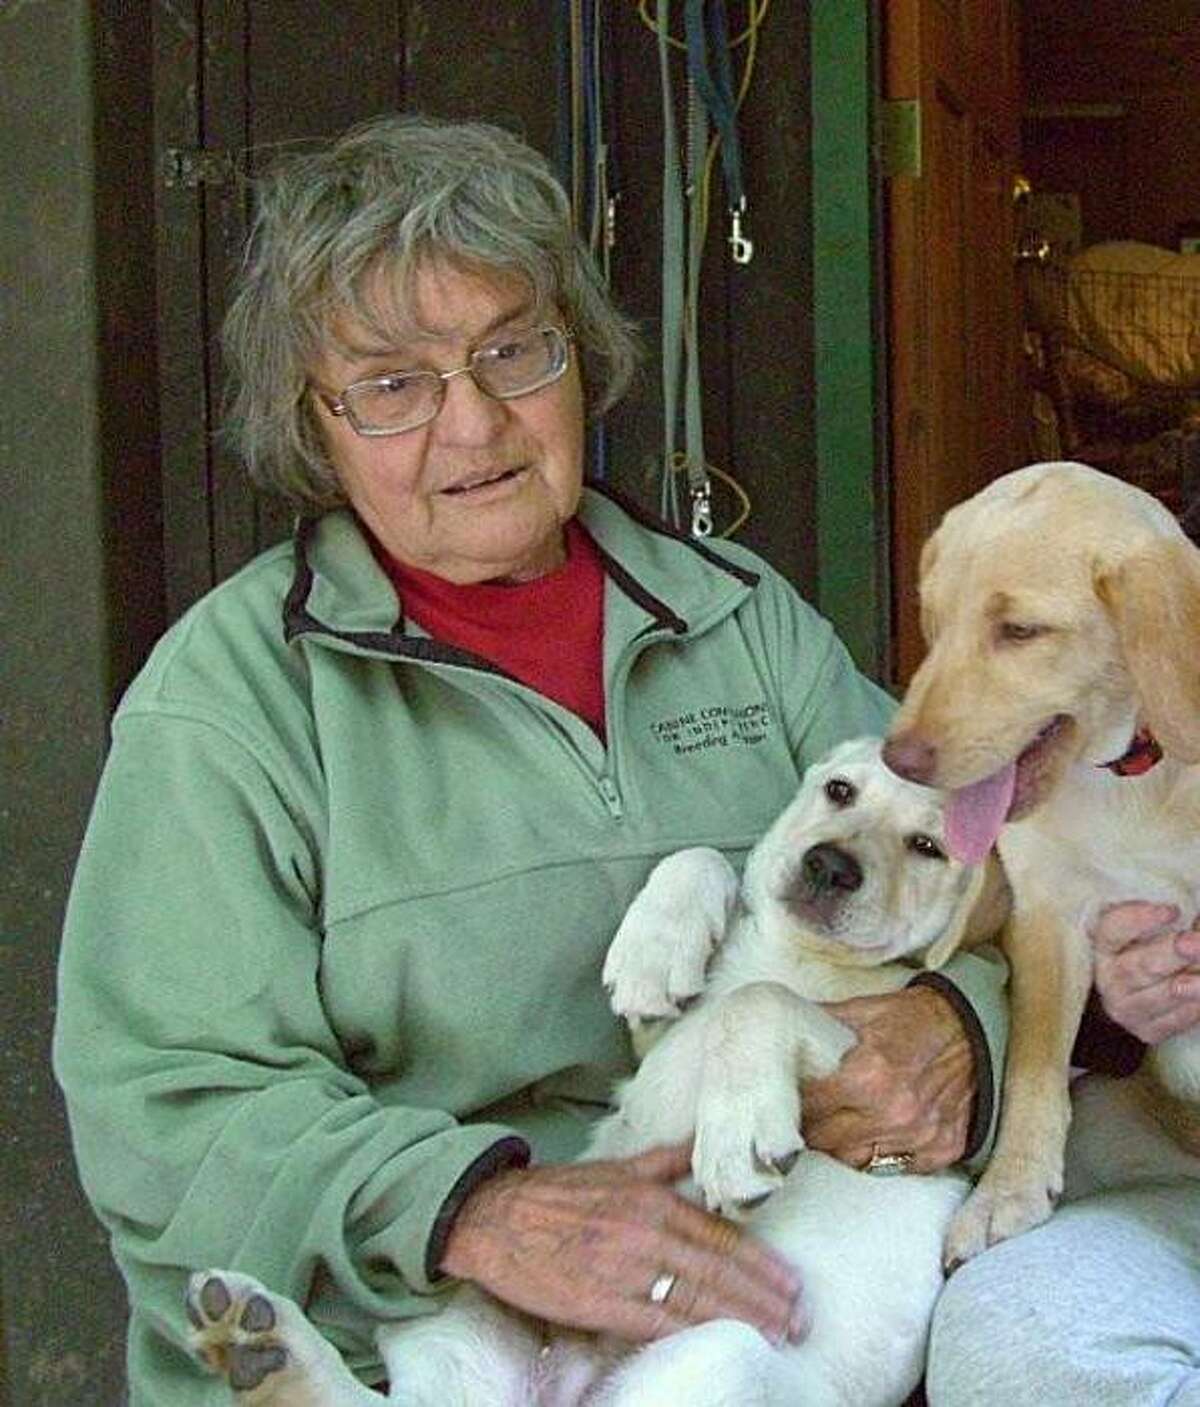 Search crews are looking for a 77-year-old woman, Silvia Lange, who disappeared at Point Reyes National Seashore over the weekend.